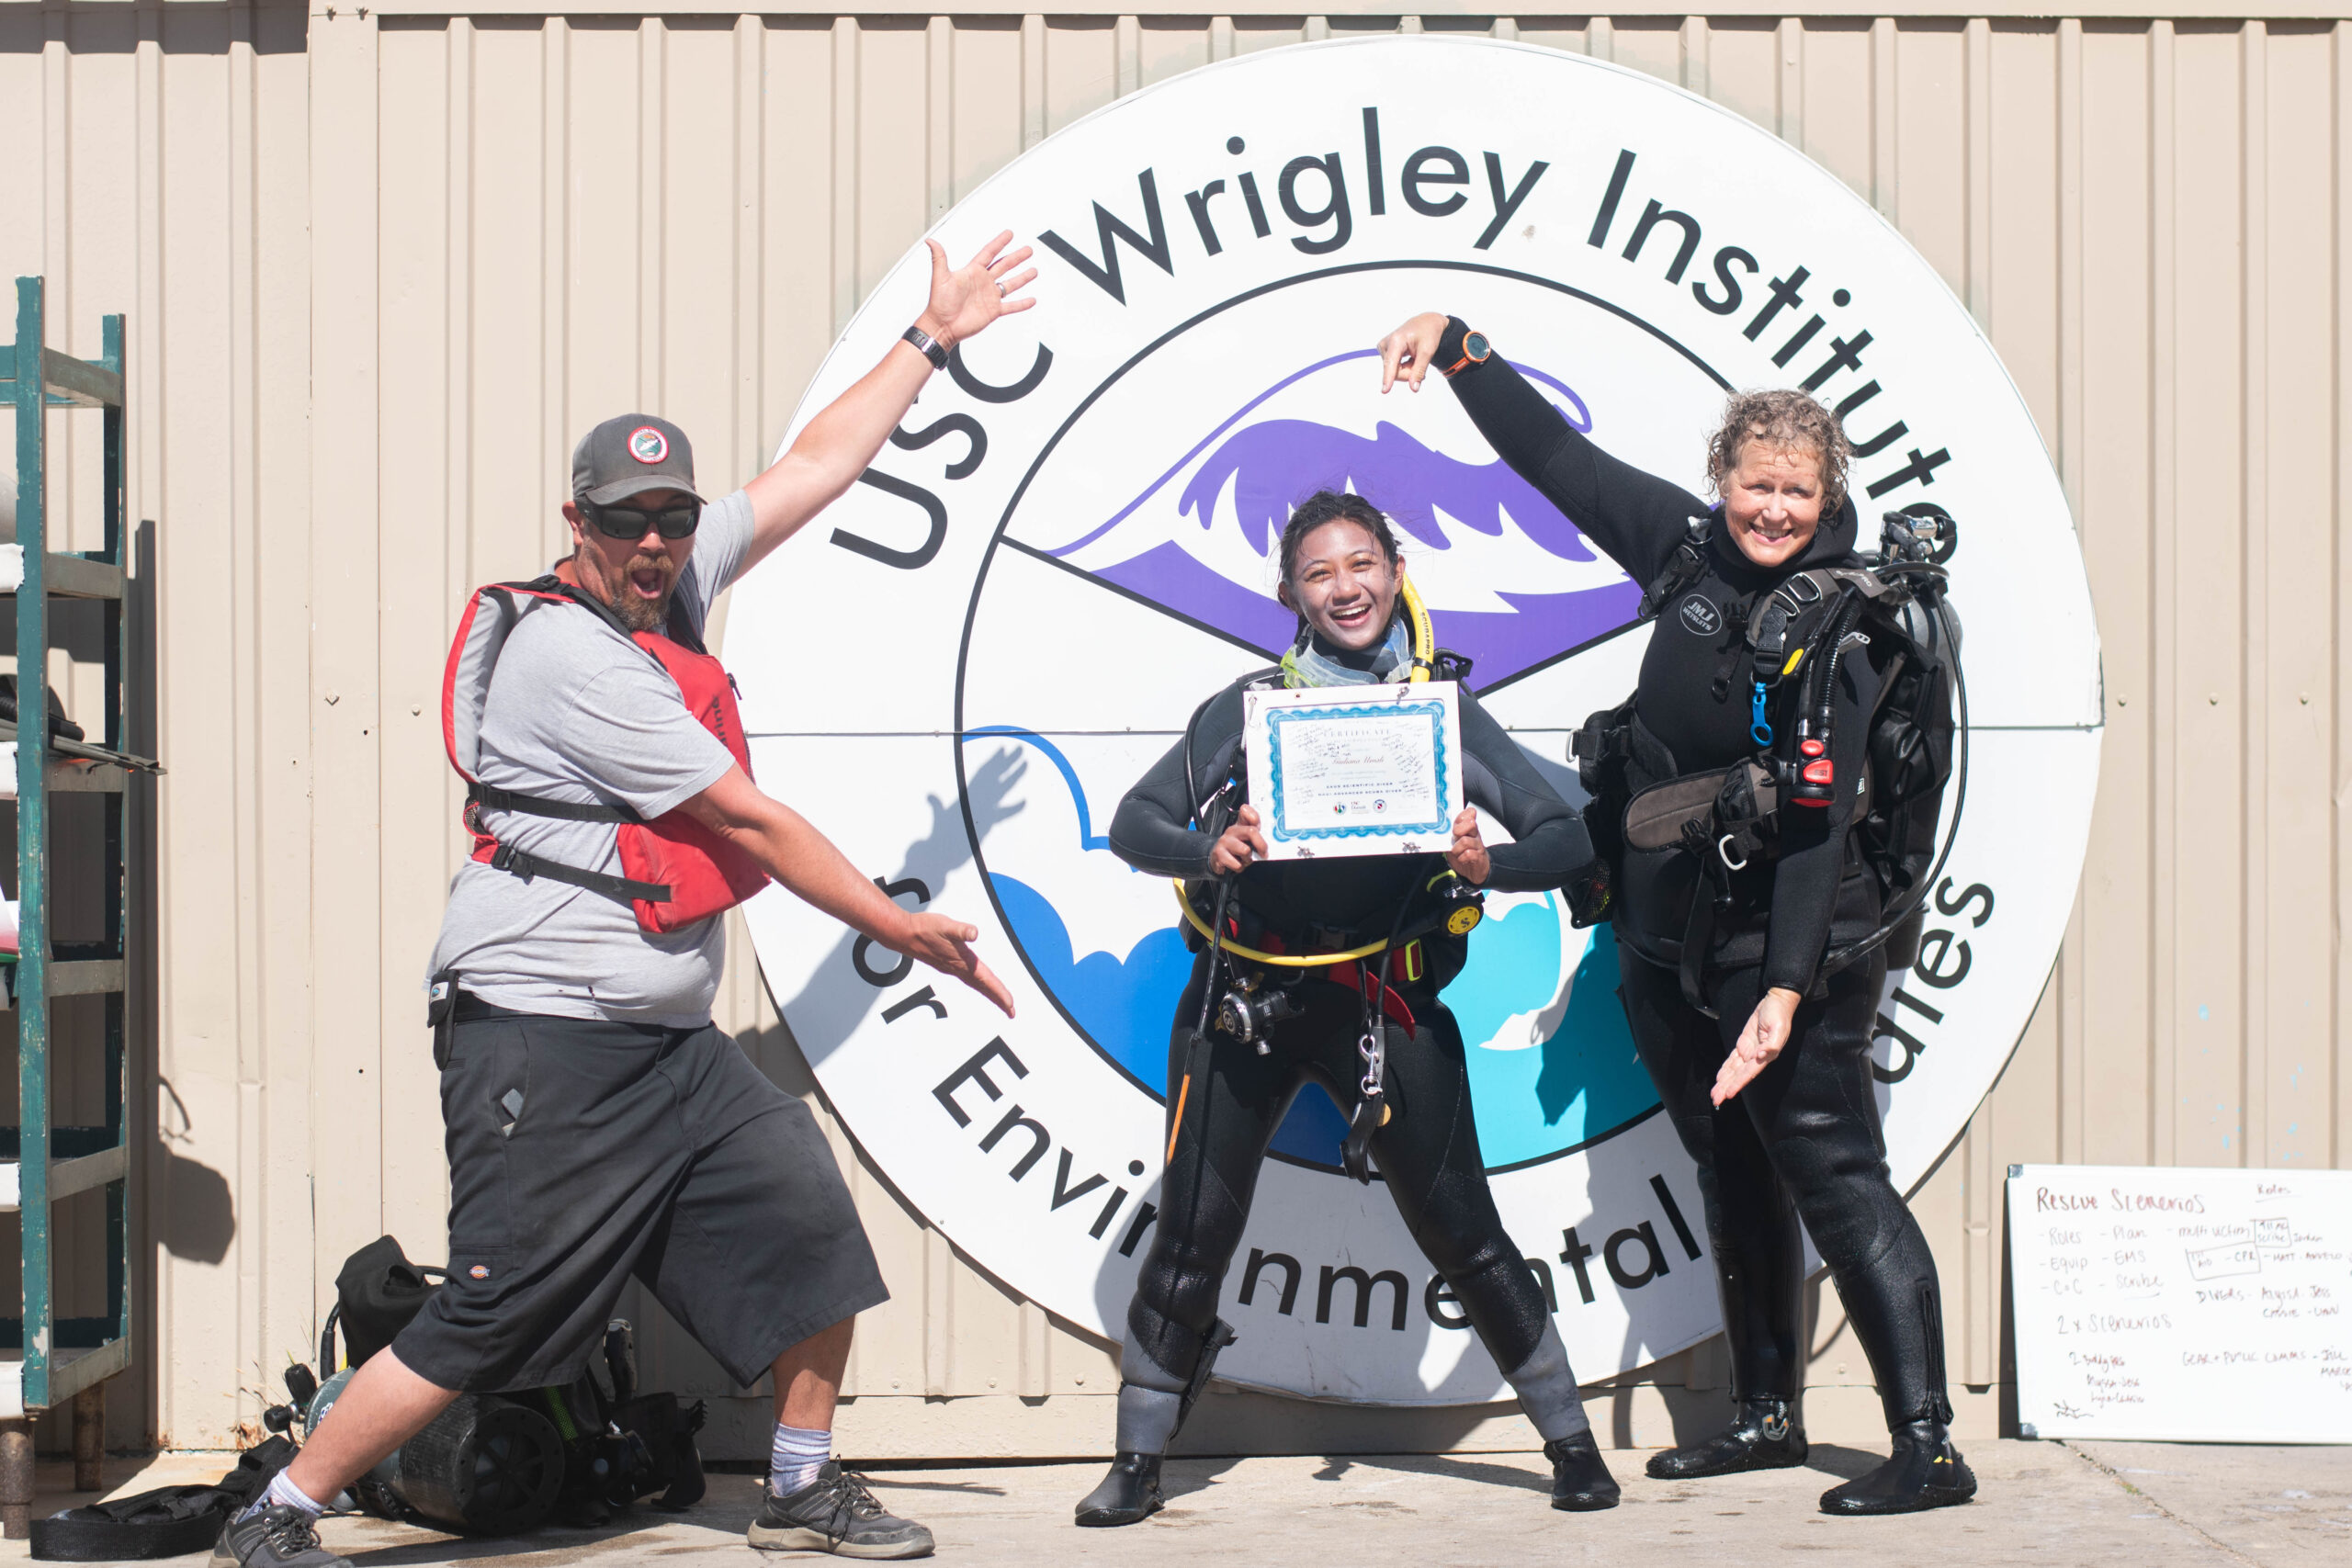 a smiling student in dive gear shows off a graduation certificate while standing between two instructors